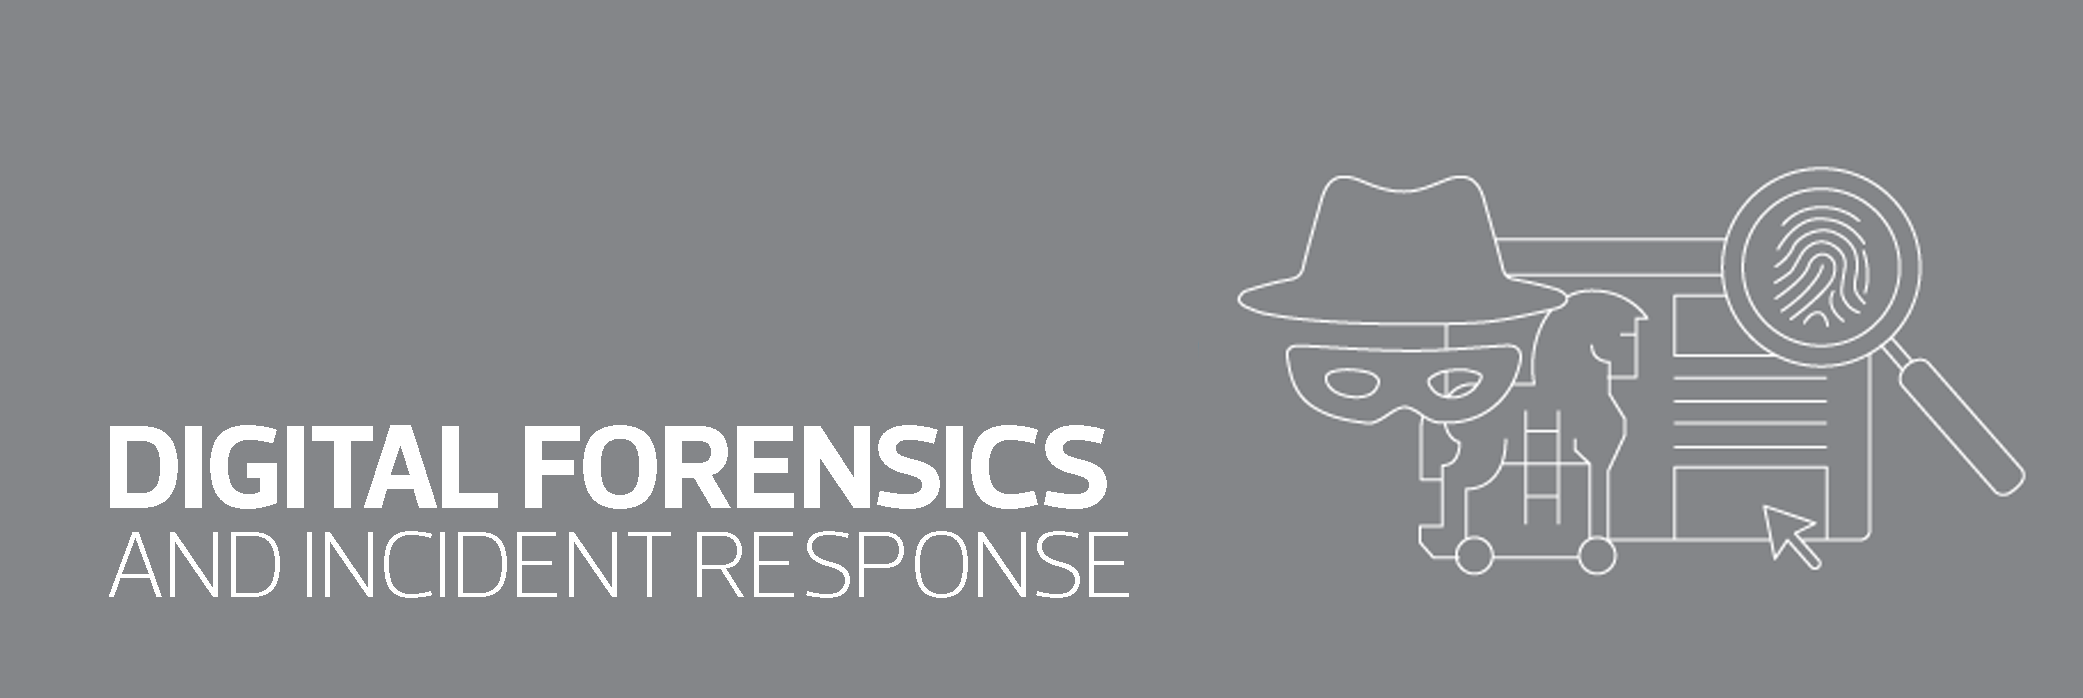 Digital Forensics services provided by RSM